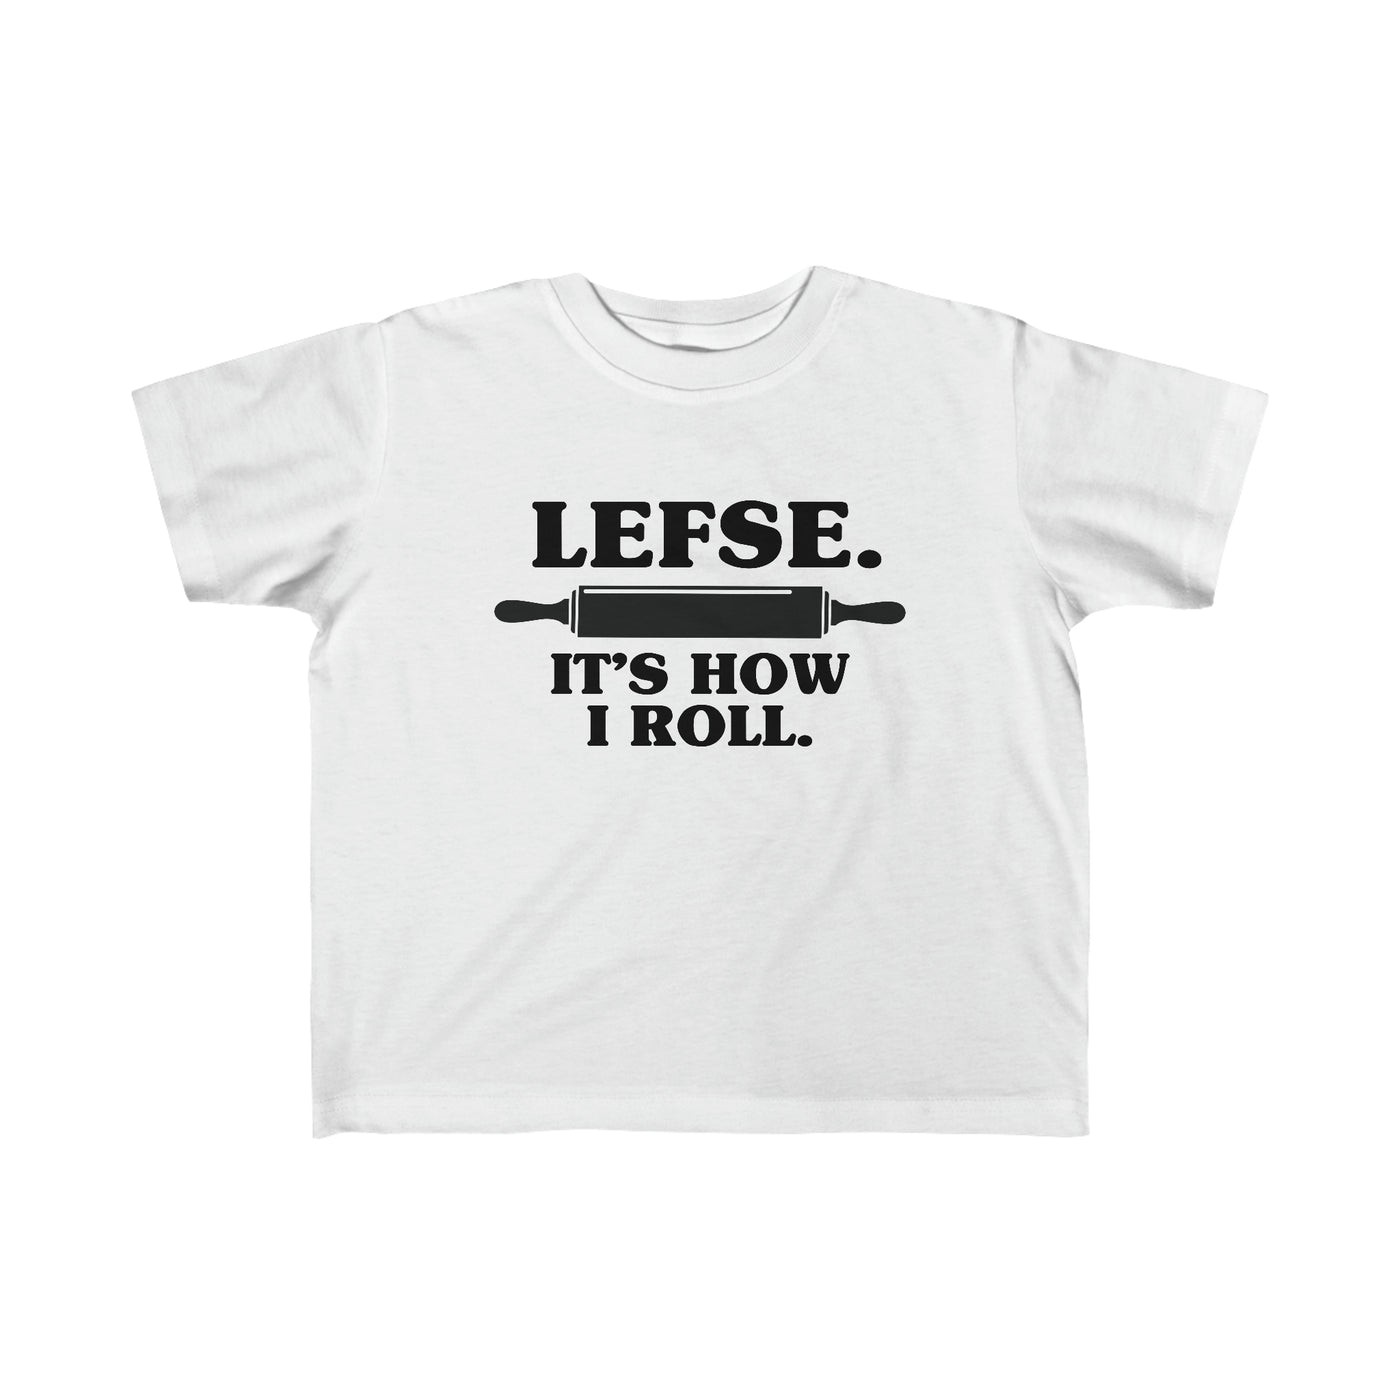 Lefse It's How I Roll Toddler Tee